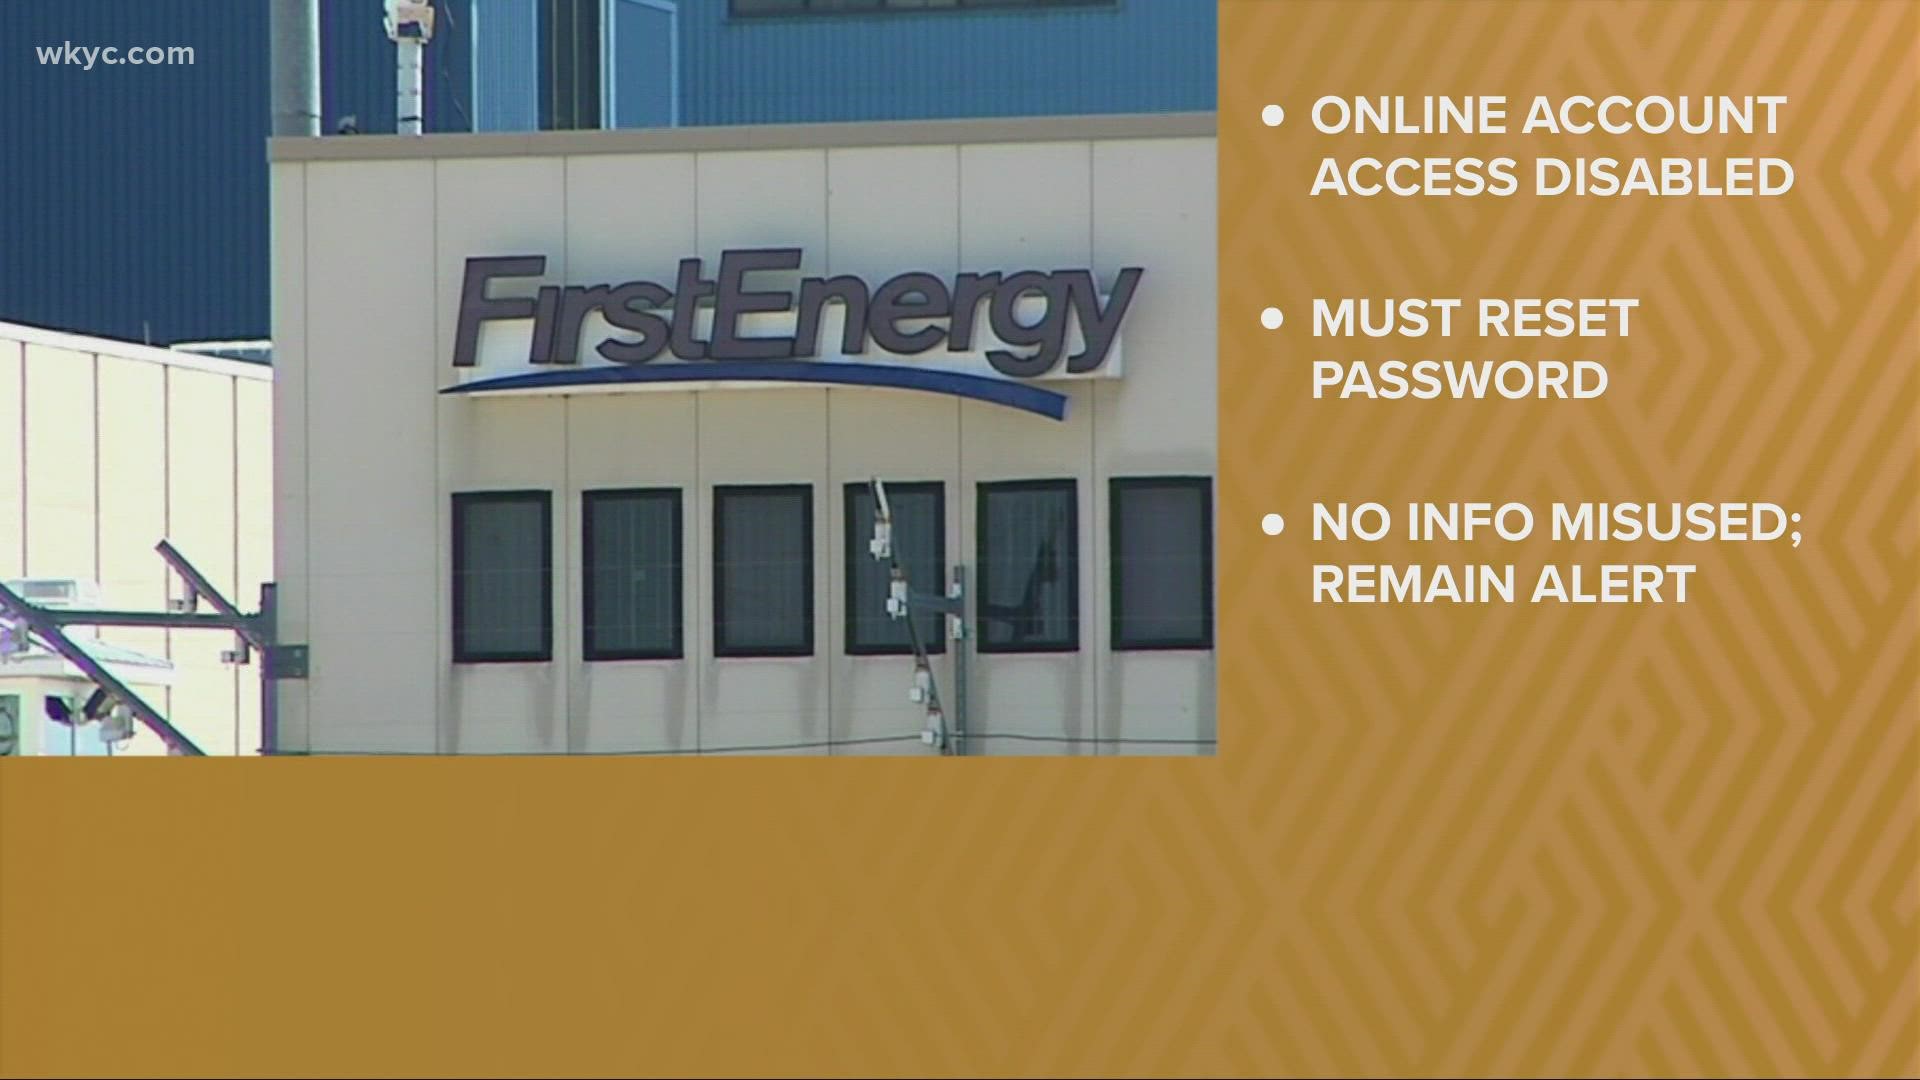 FirstEnergy is alerting customers to change their account password after unauthorized logins were detected.